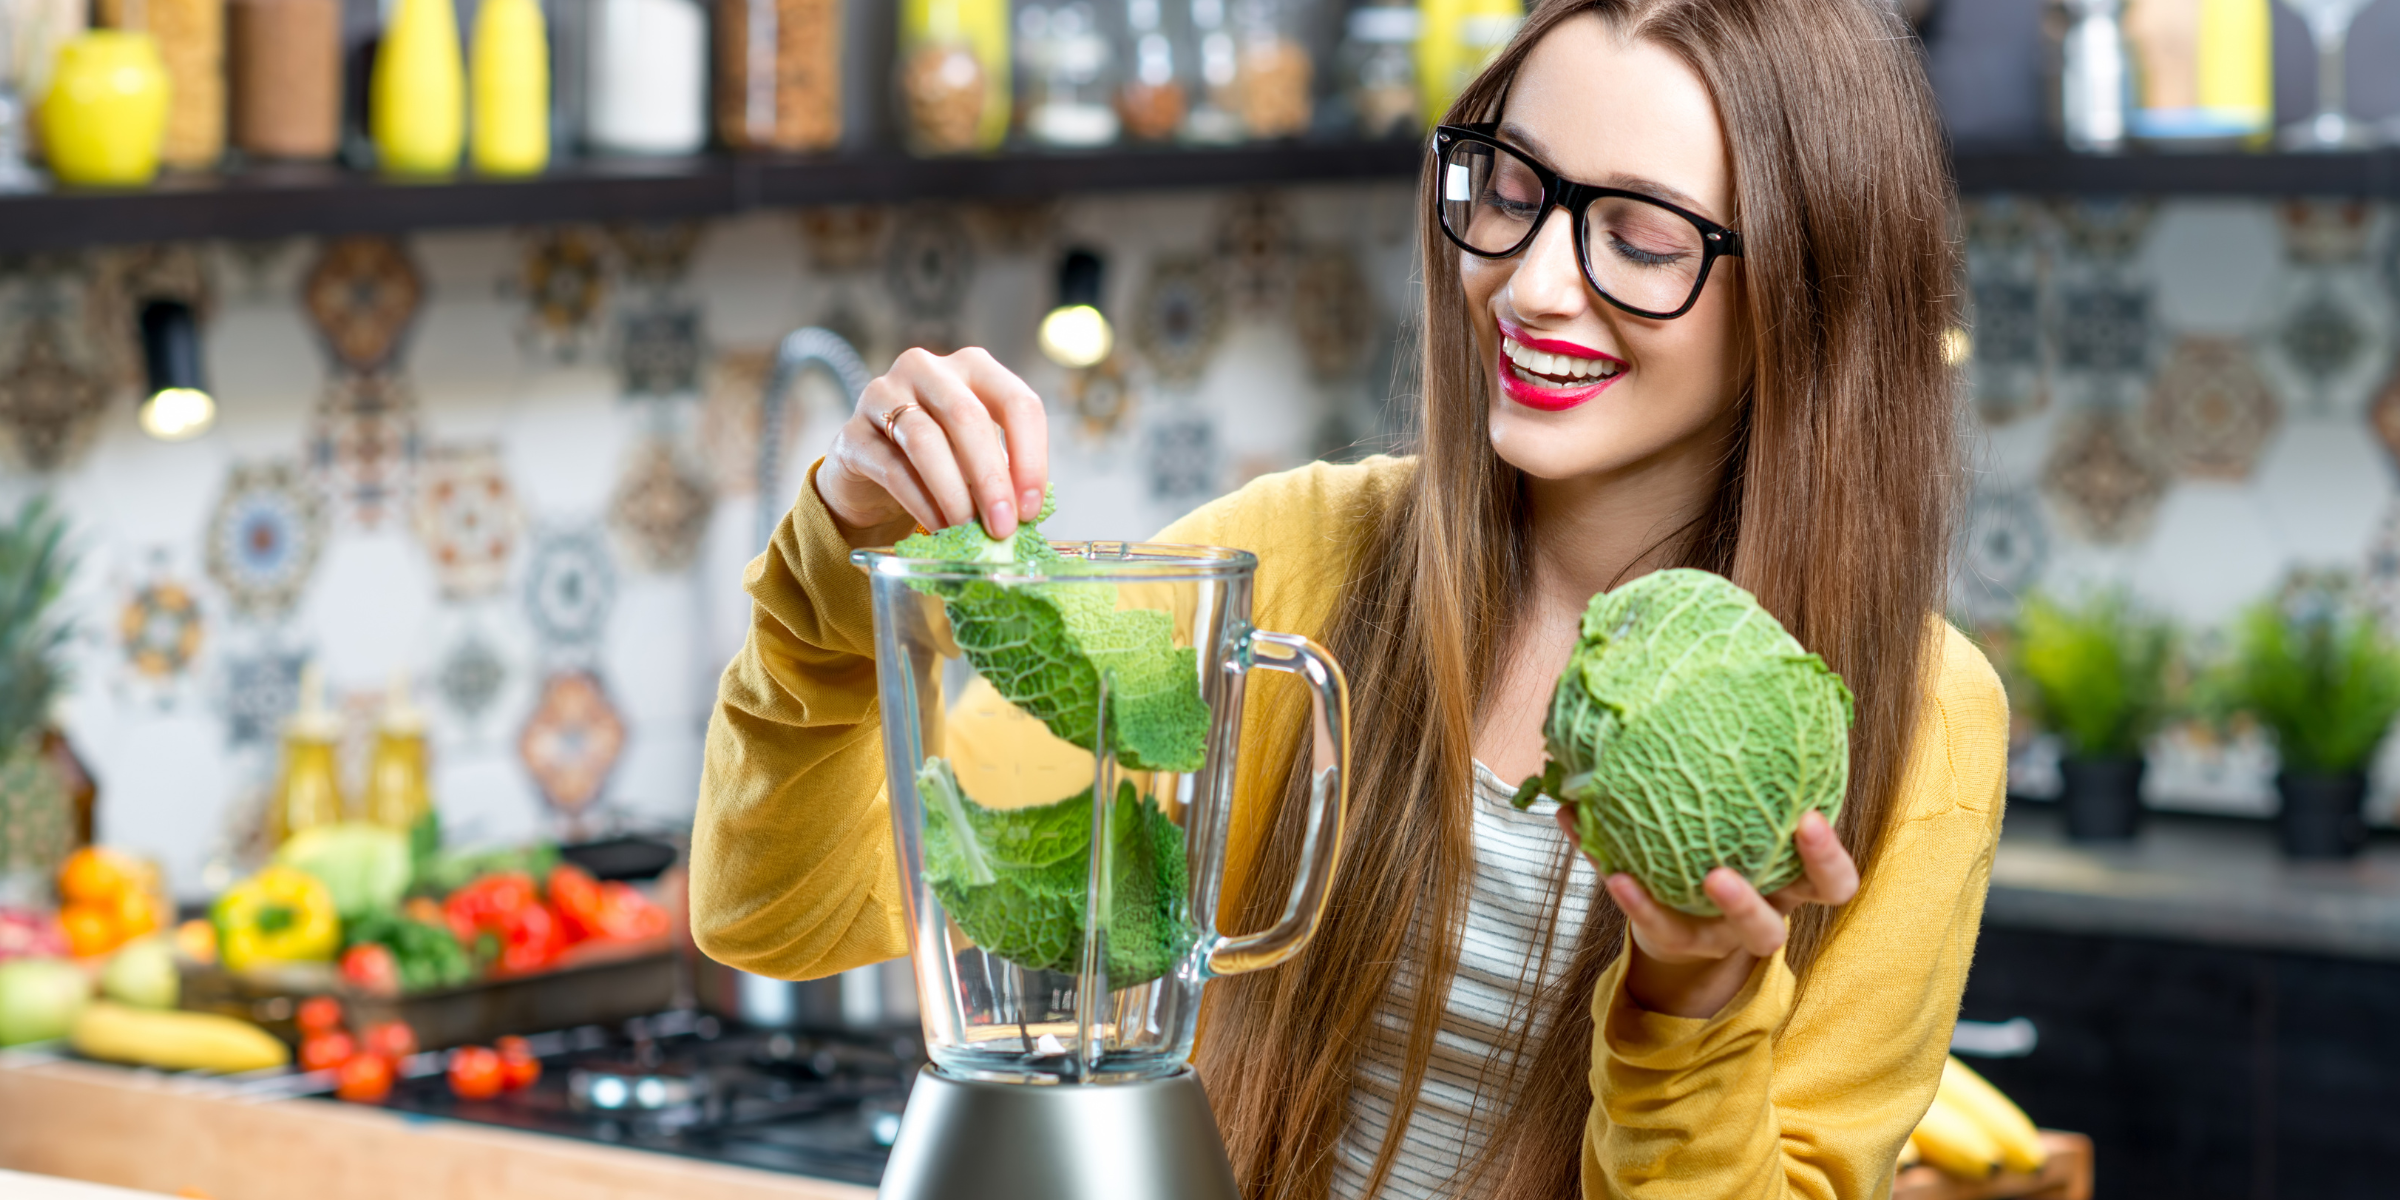 woman juicing lettuce in blender in the kitchen for a healthy detox